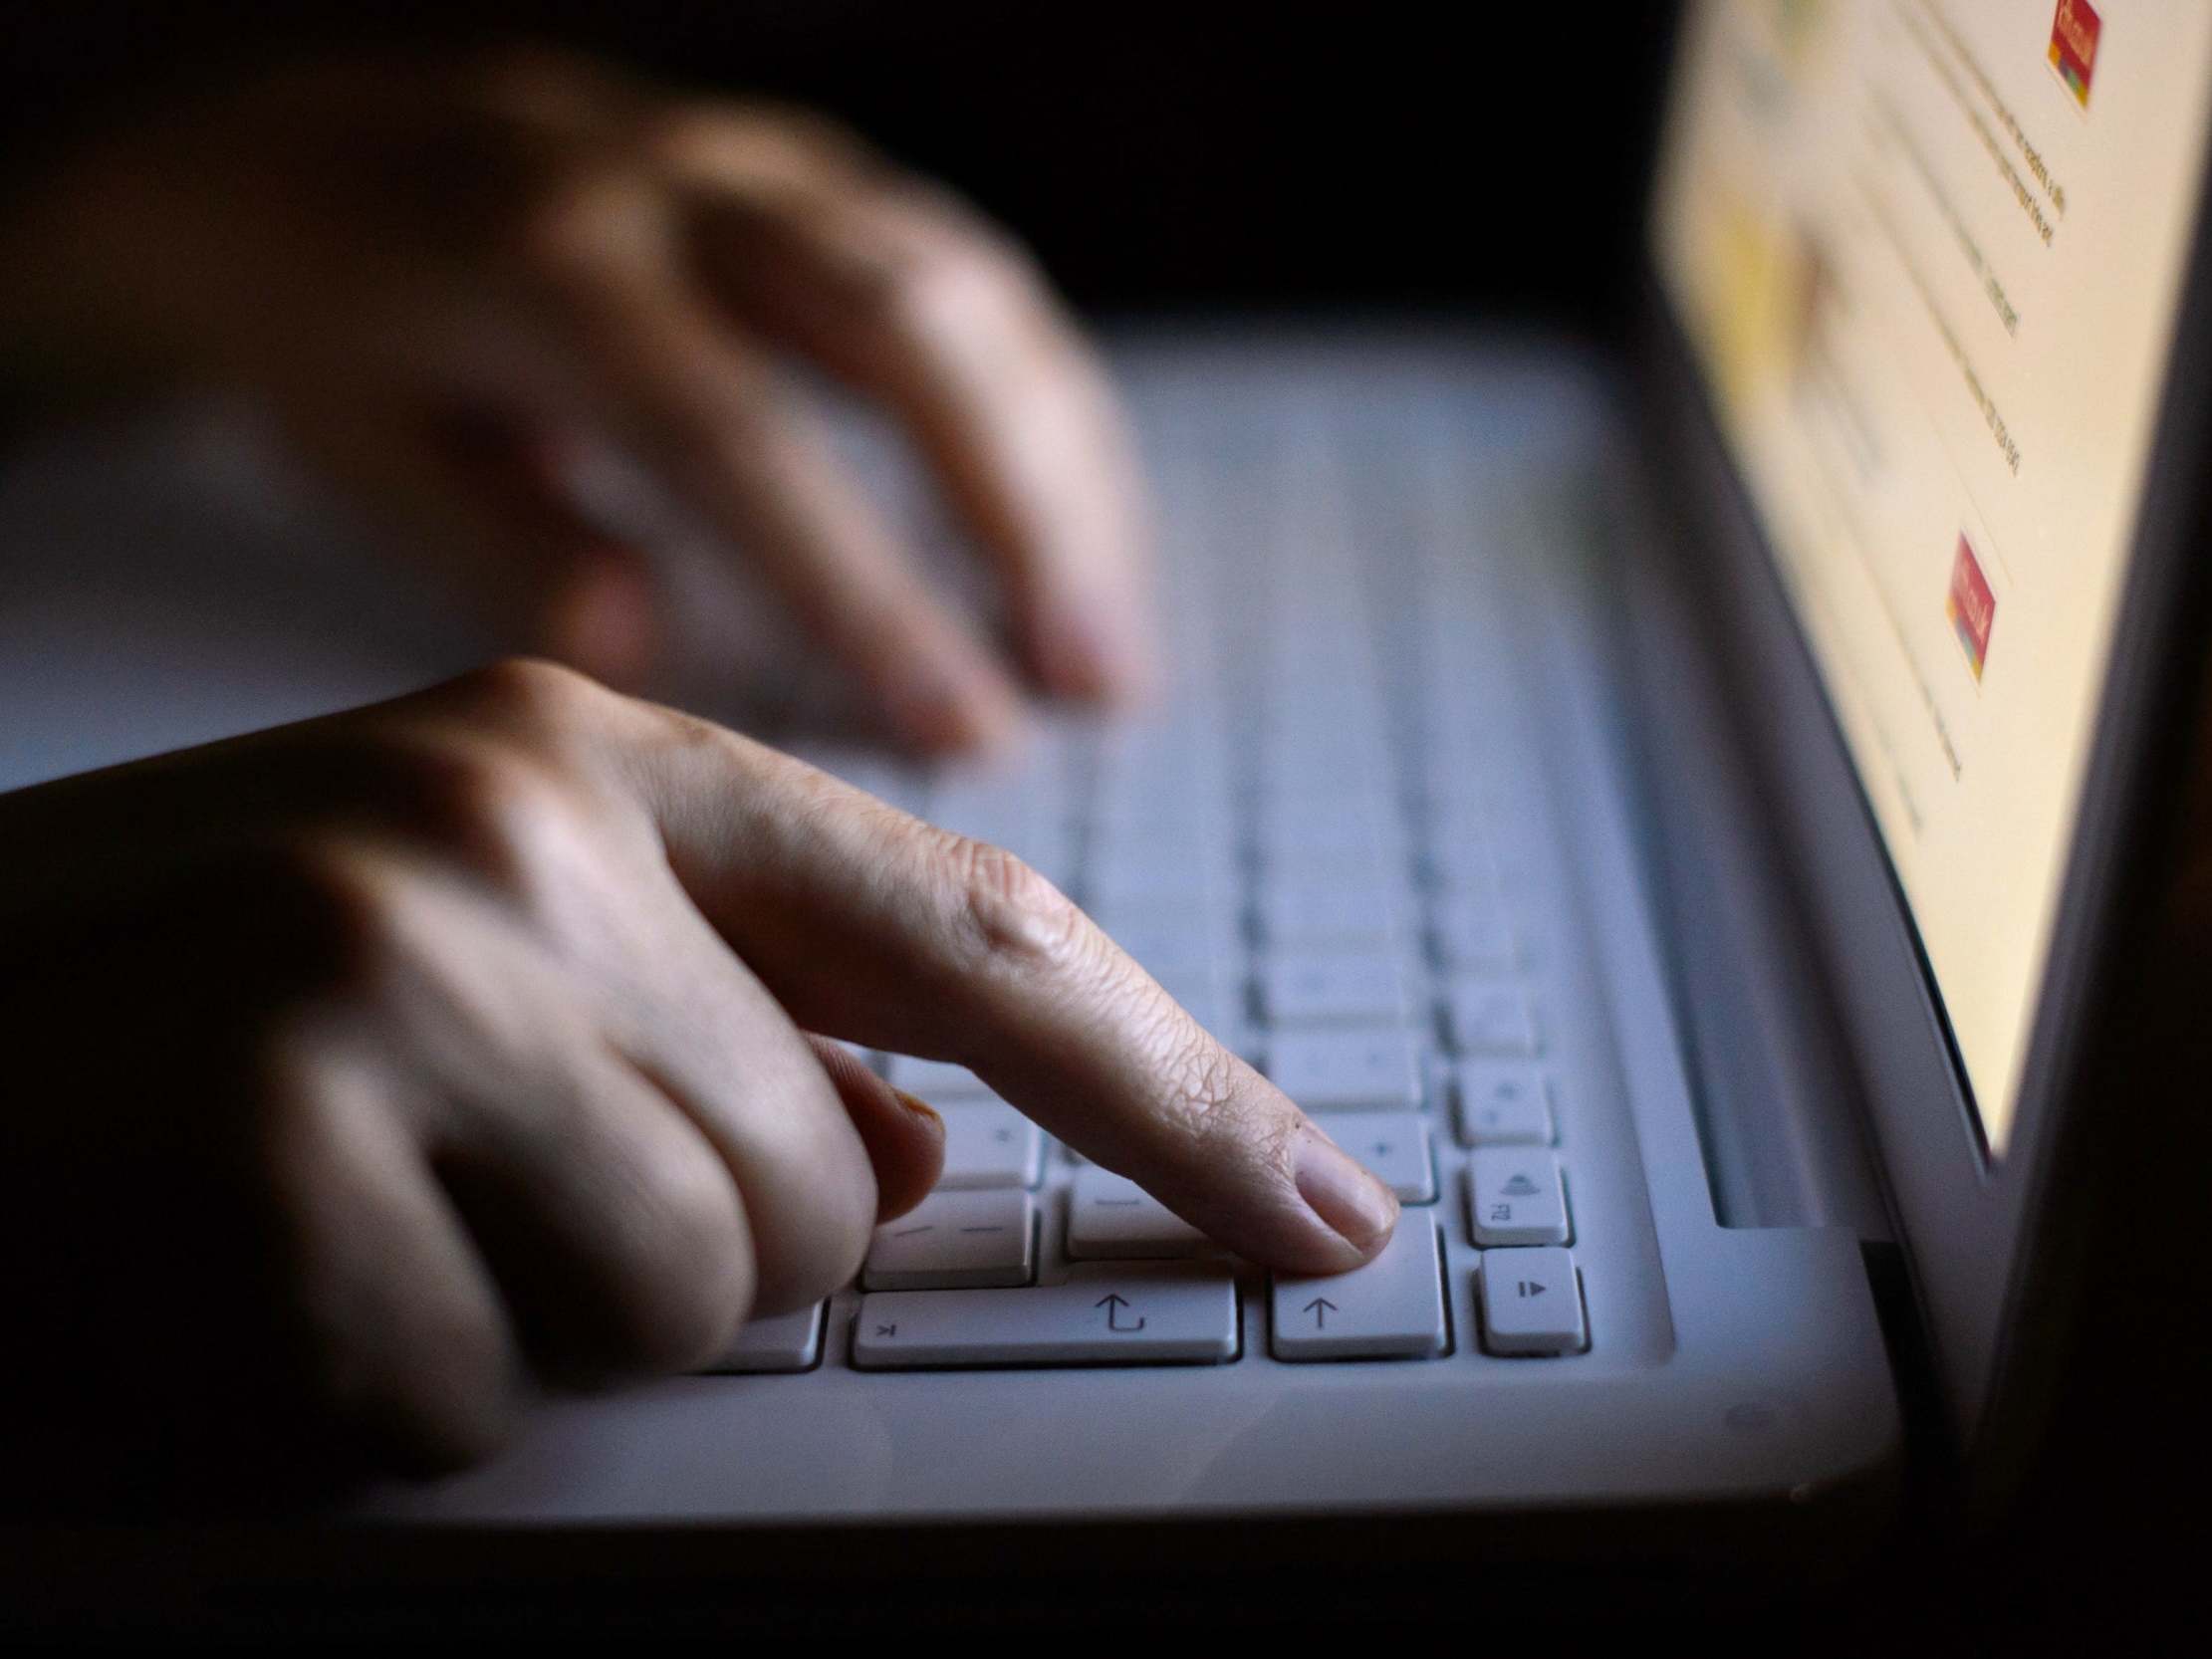 The groups commonly pose as children online to set up meetings with alleged paedophiles